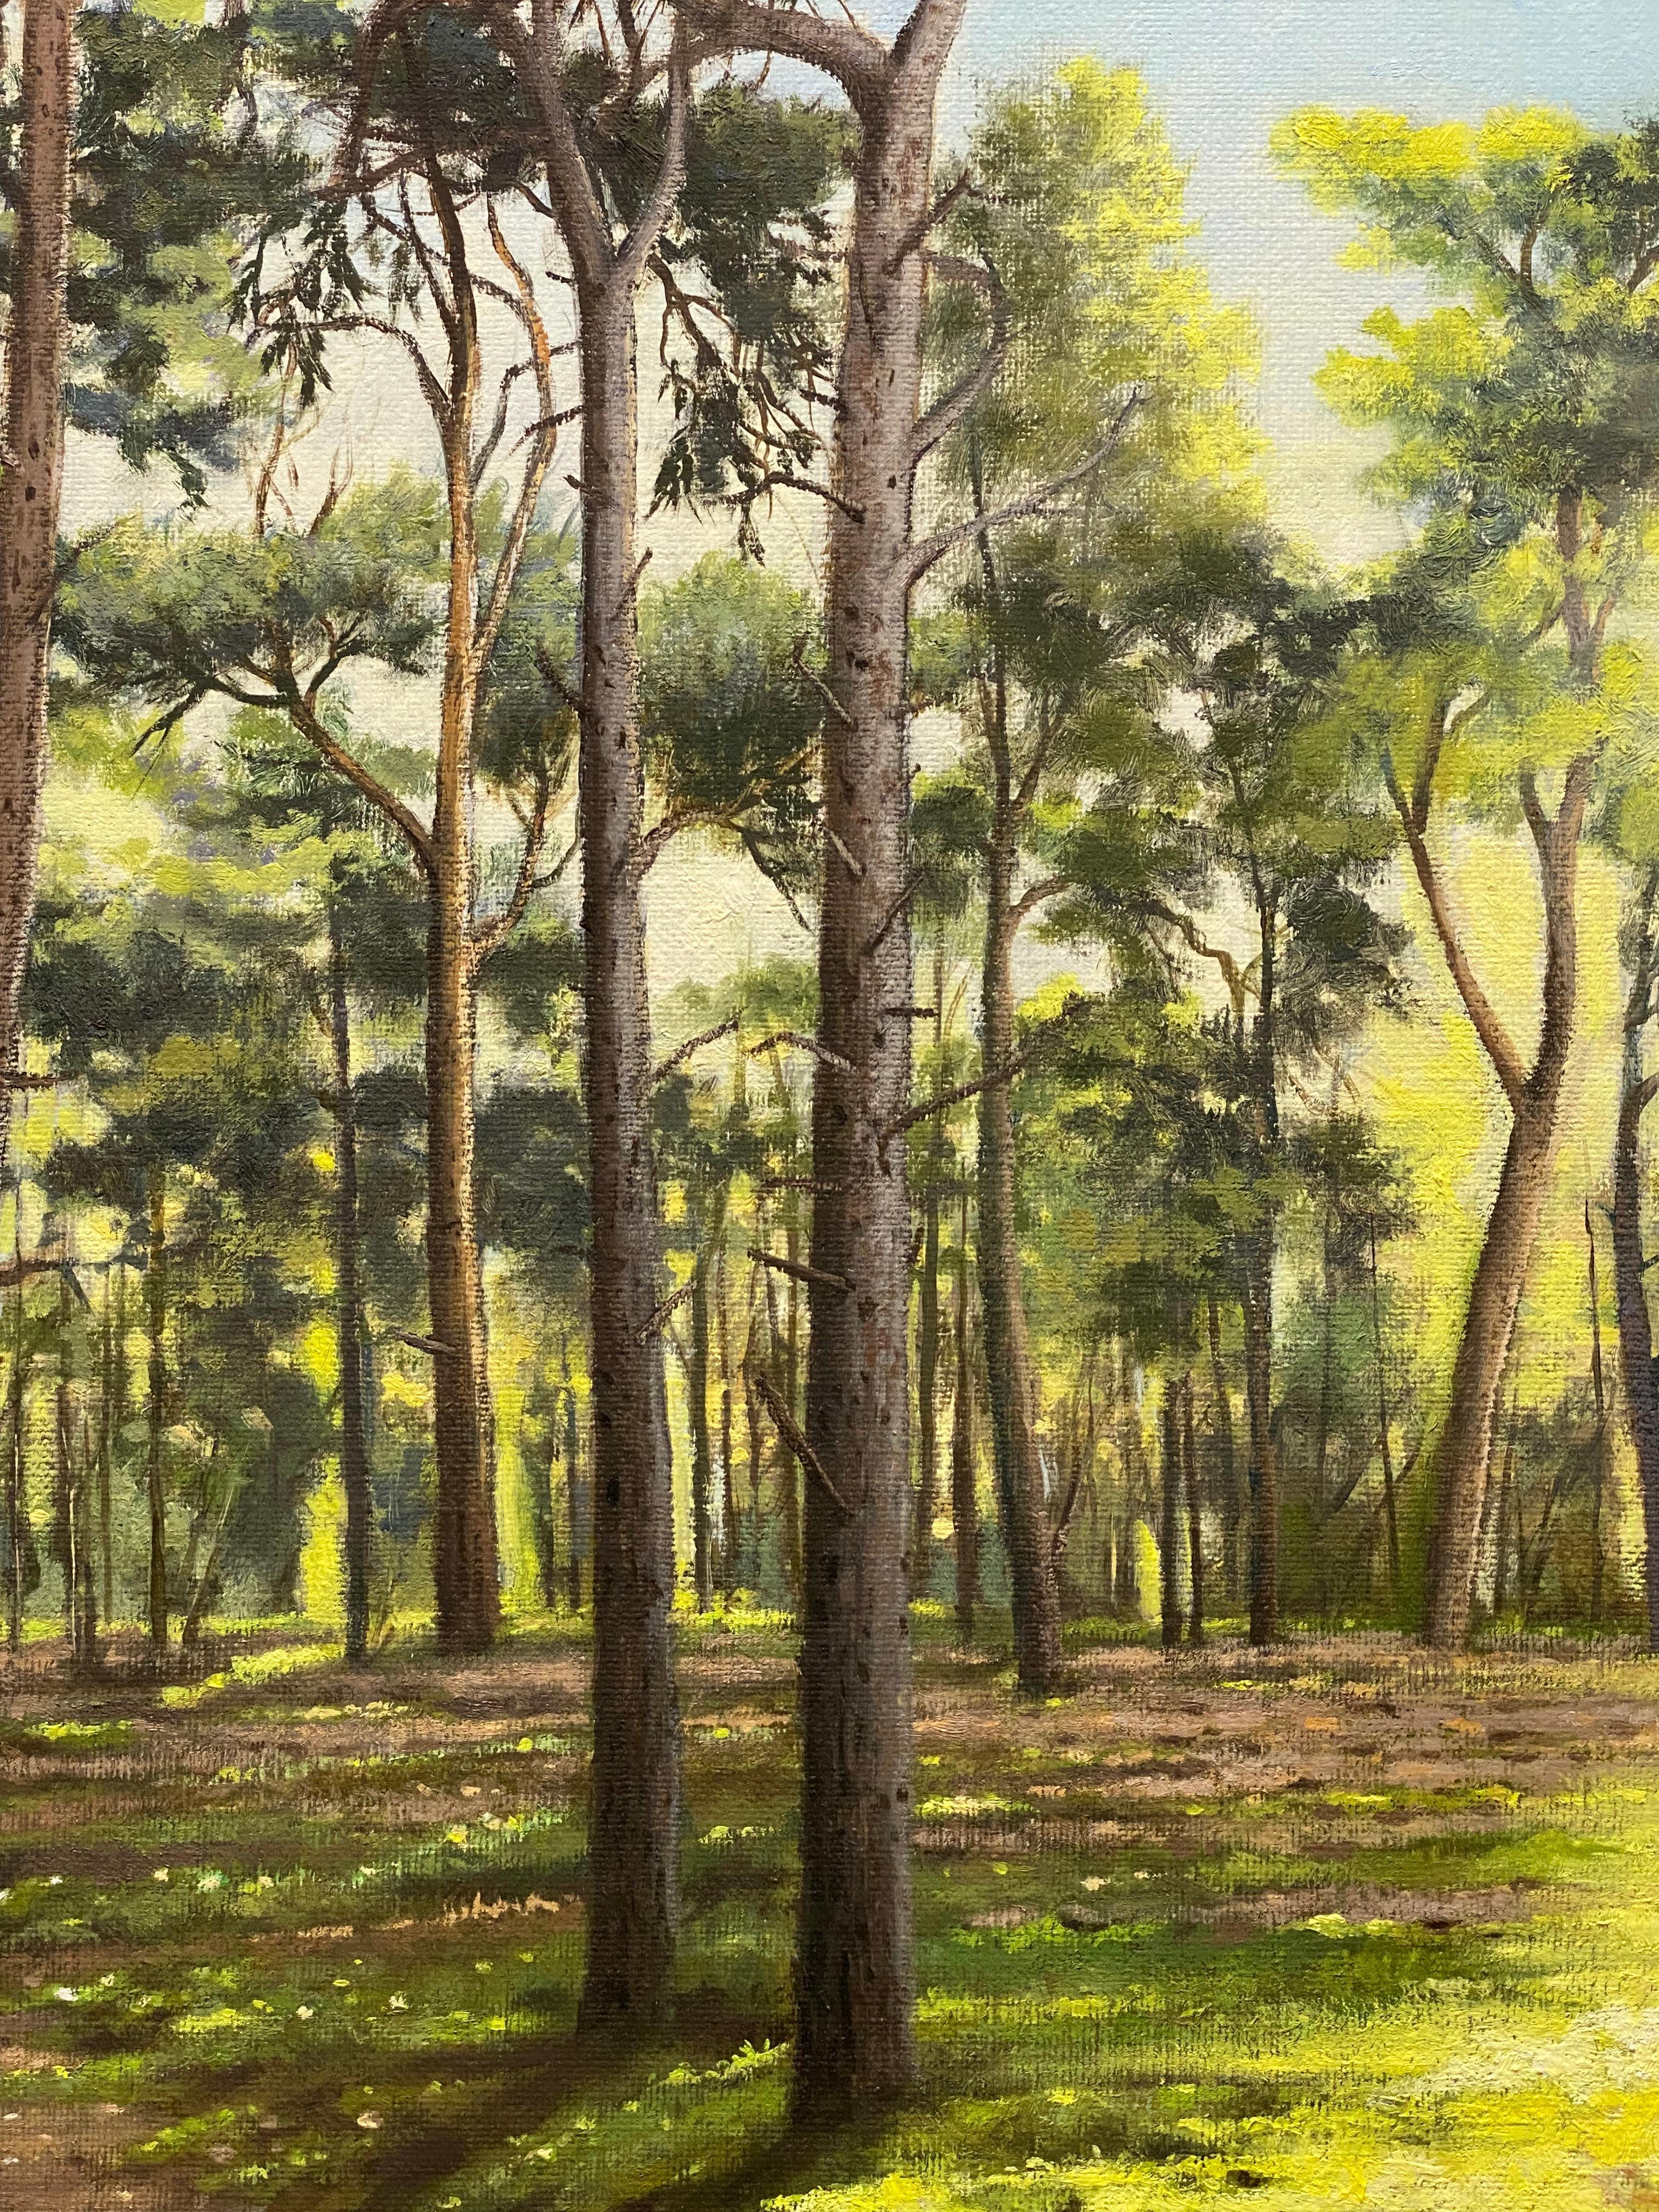  21st Century Contemporary Dutch Landscape Painting of a Forest - Brown Figurative Painting by Jan Smits